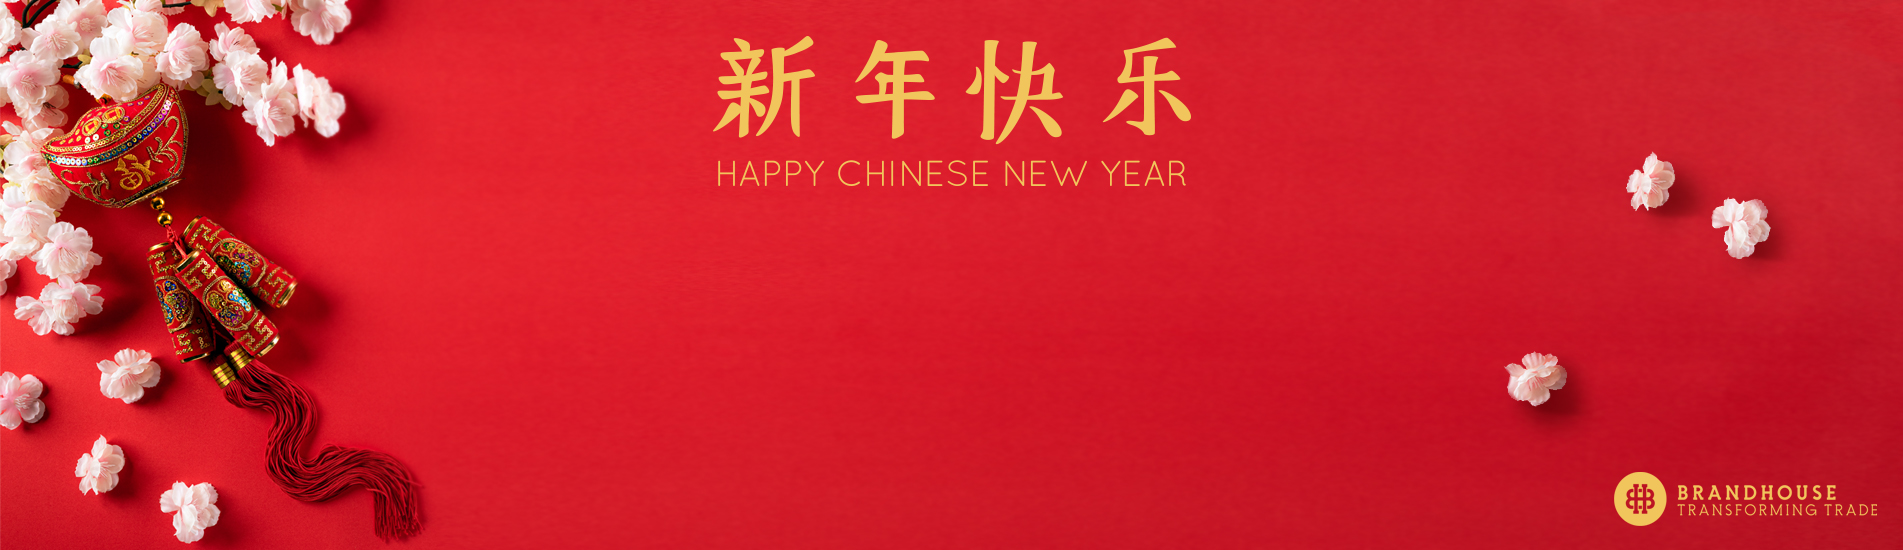 Chinese New Year 2020: expected sales volumes and trends